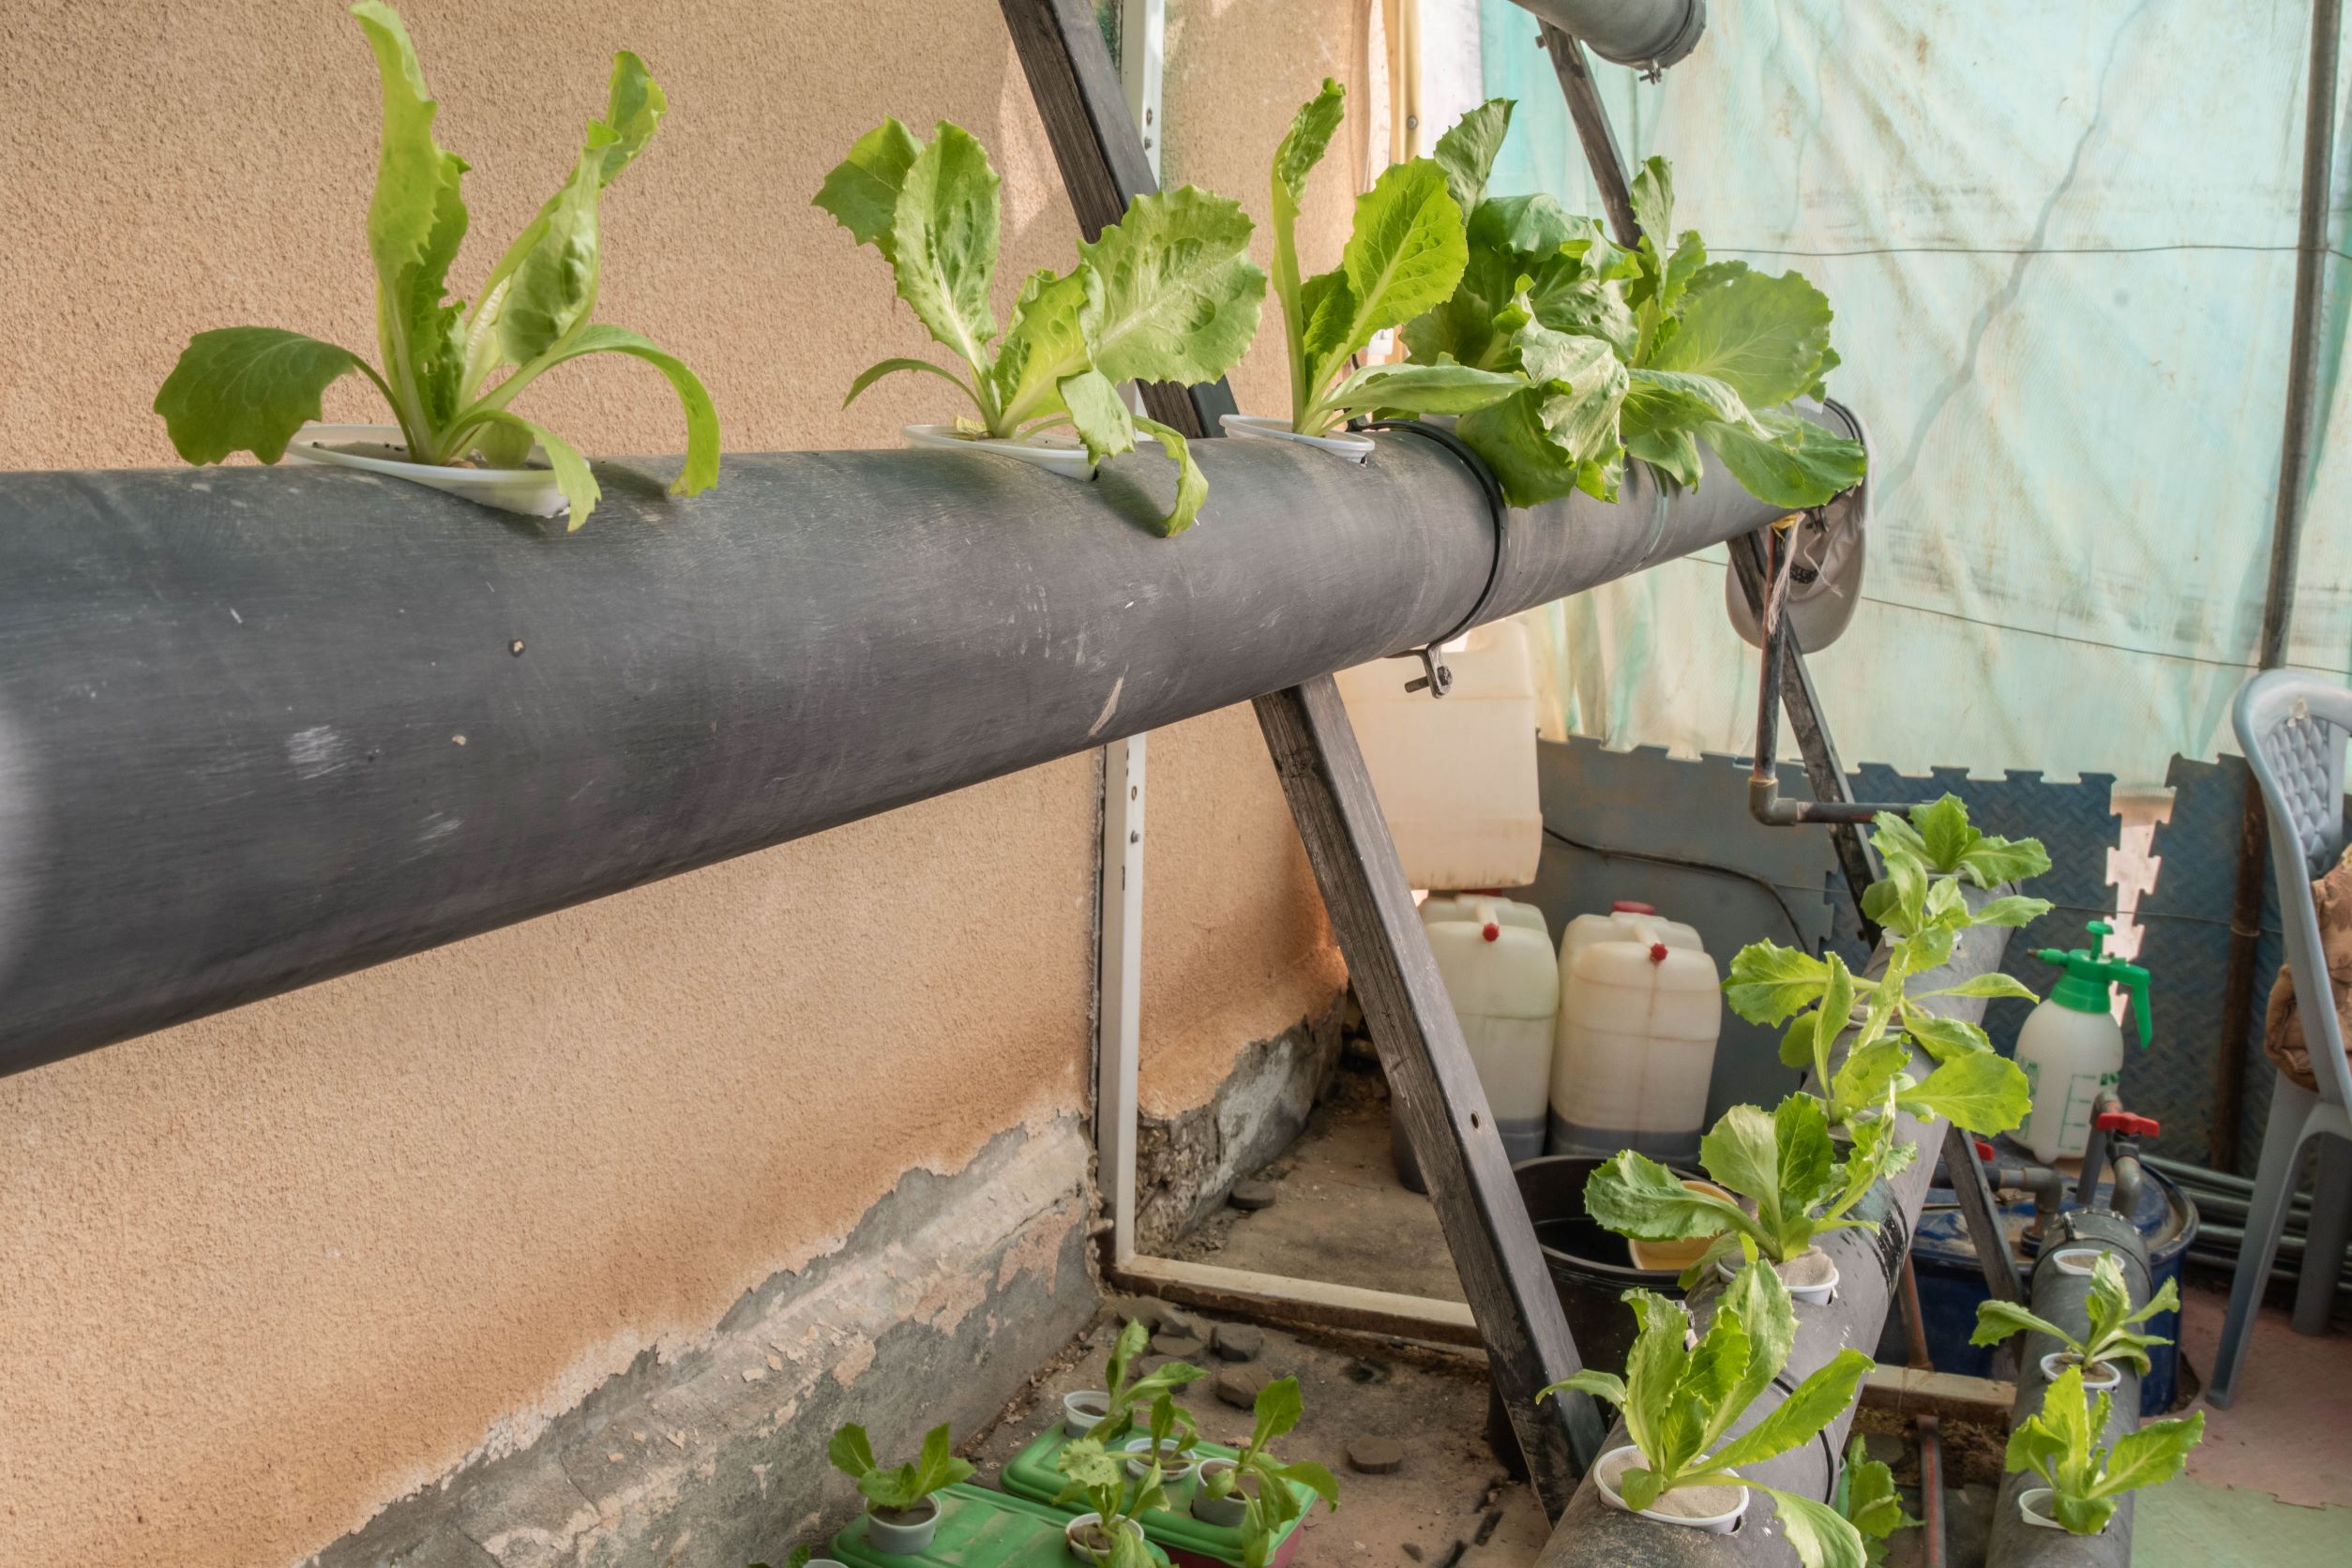 In the community centres, as well as in many of the gardens of the shelter, you can find hydroponic gardening. Here seeds are put in water with added nutrients to grow vegetables. This way no soil is needed.